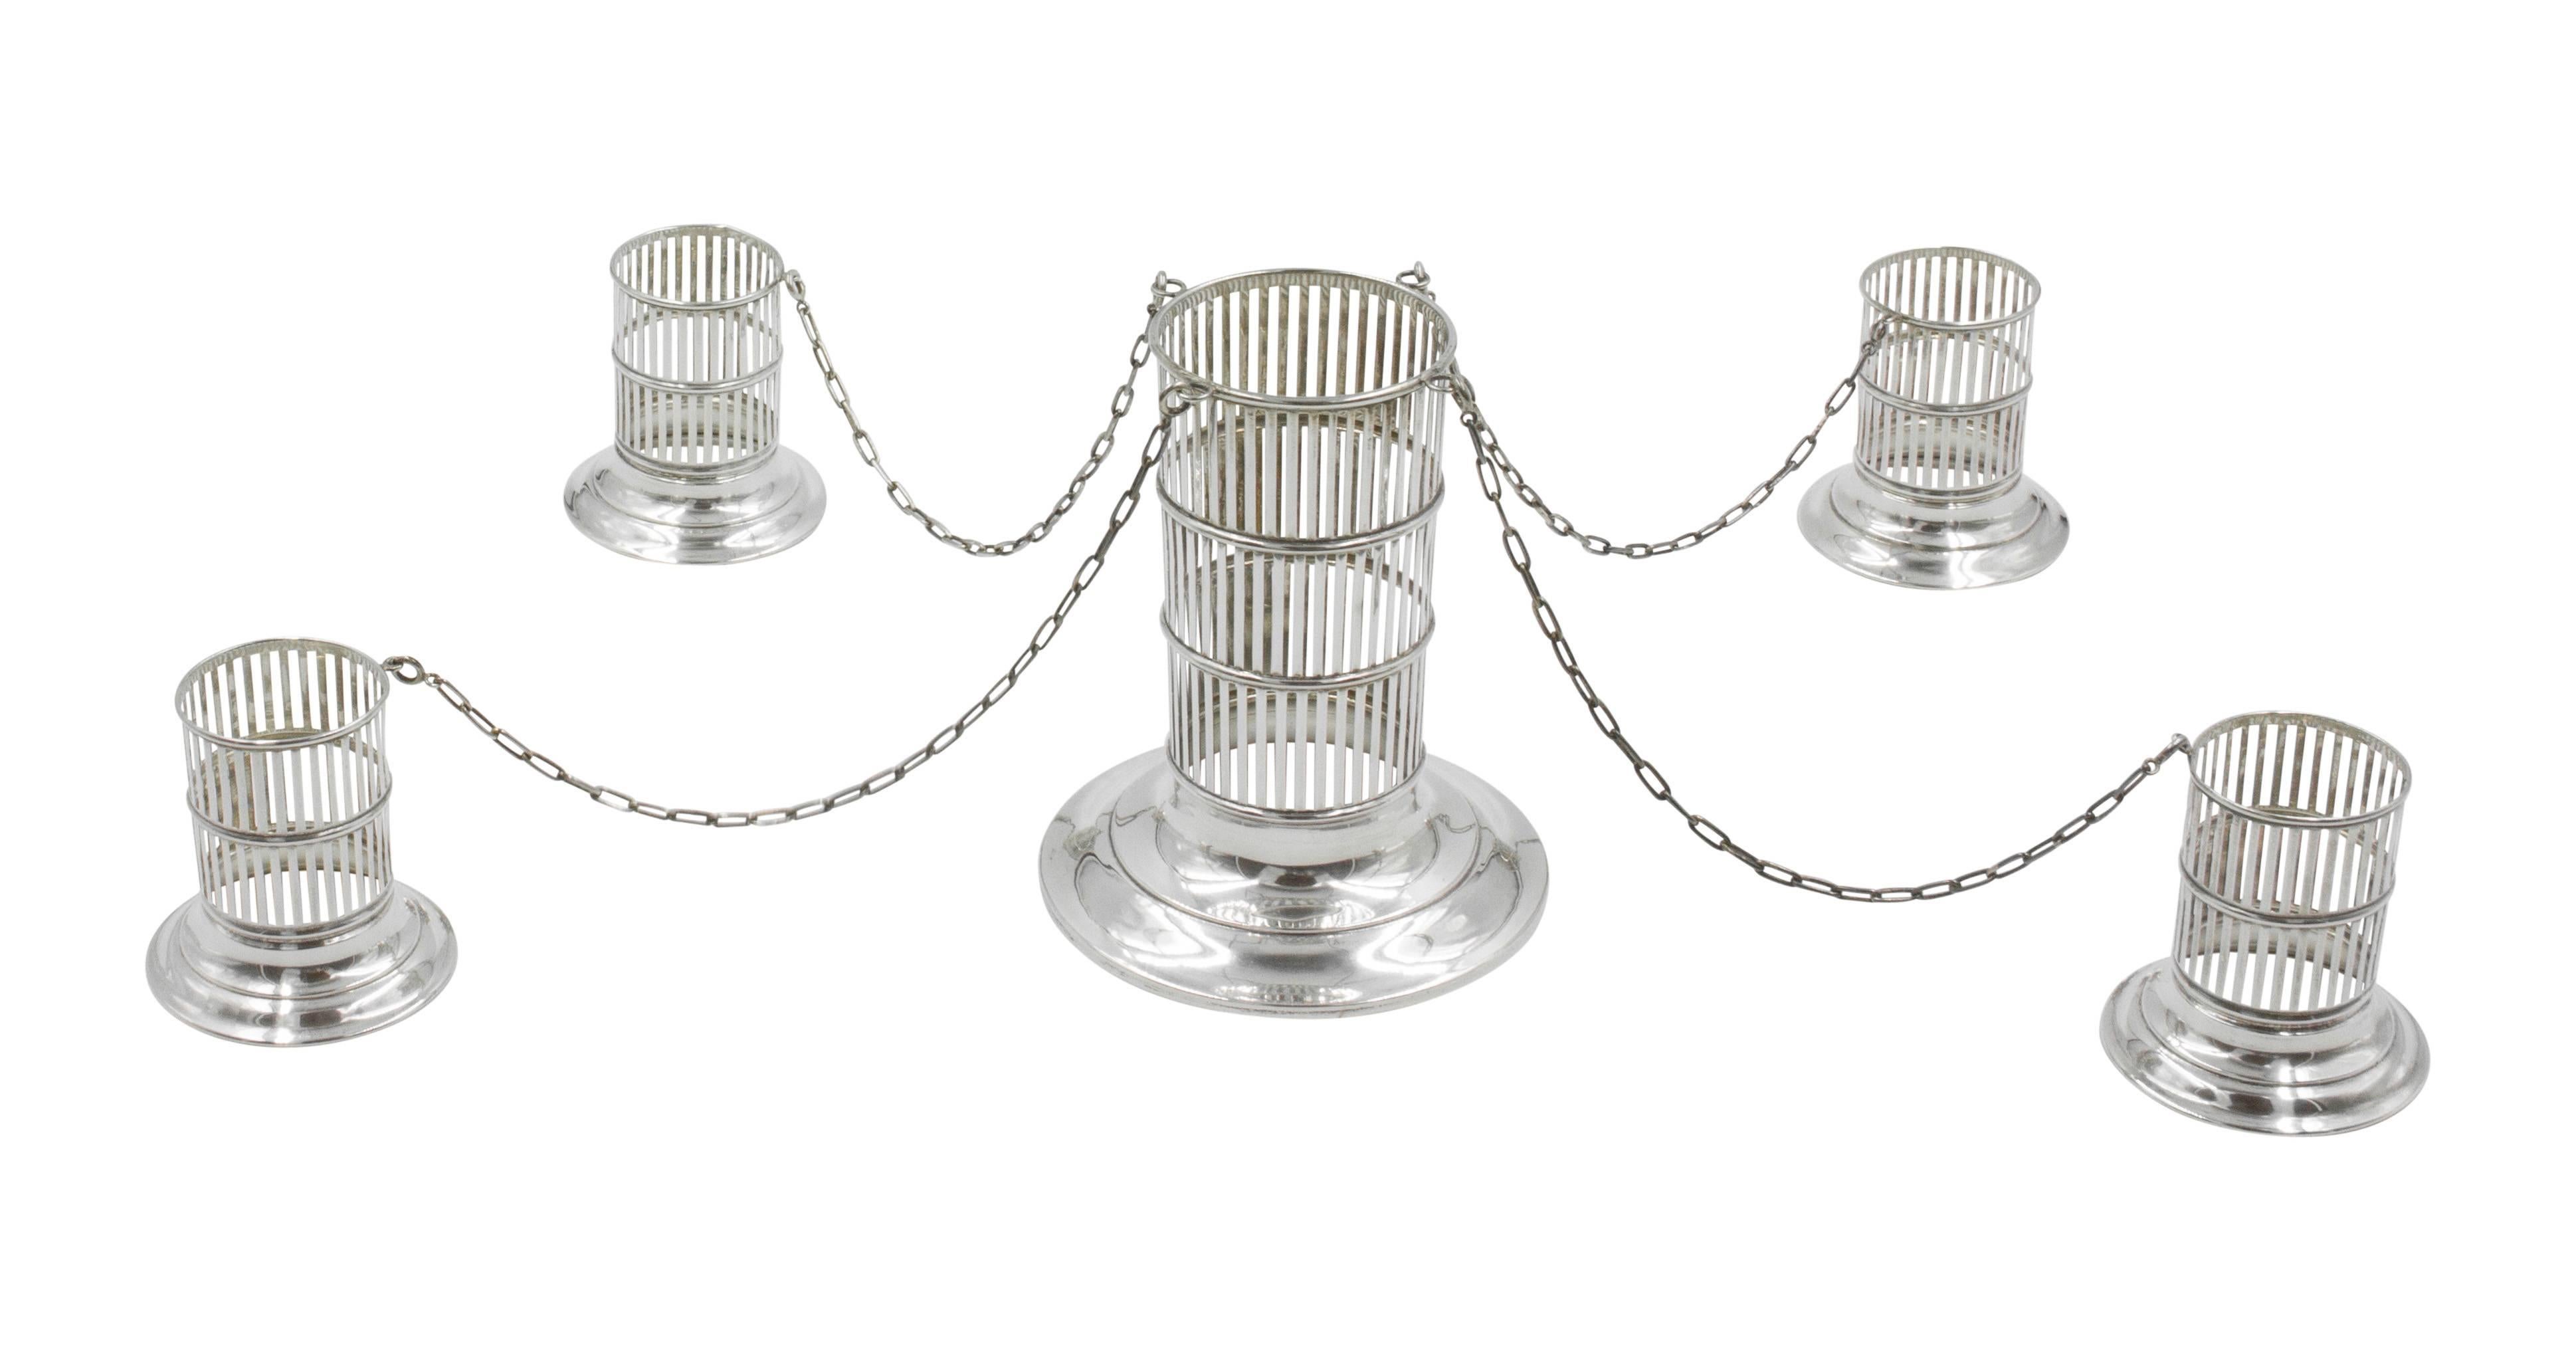 For those that want the rare and unusual, listen up, this is for you! A vase in the center with four matching smaller vases connected by a sterling silver chain. This would make a beautiful centerpiece on your table, or remove the chain and use the